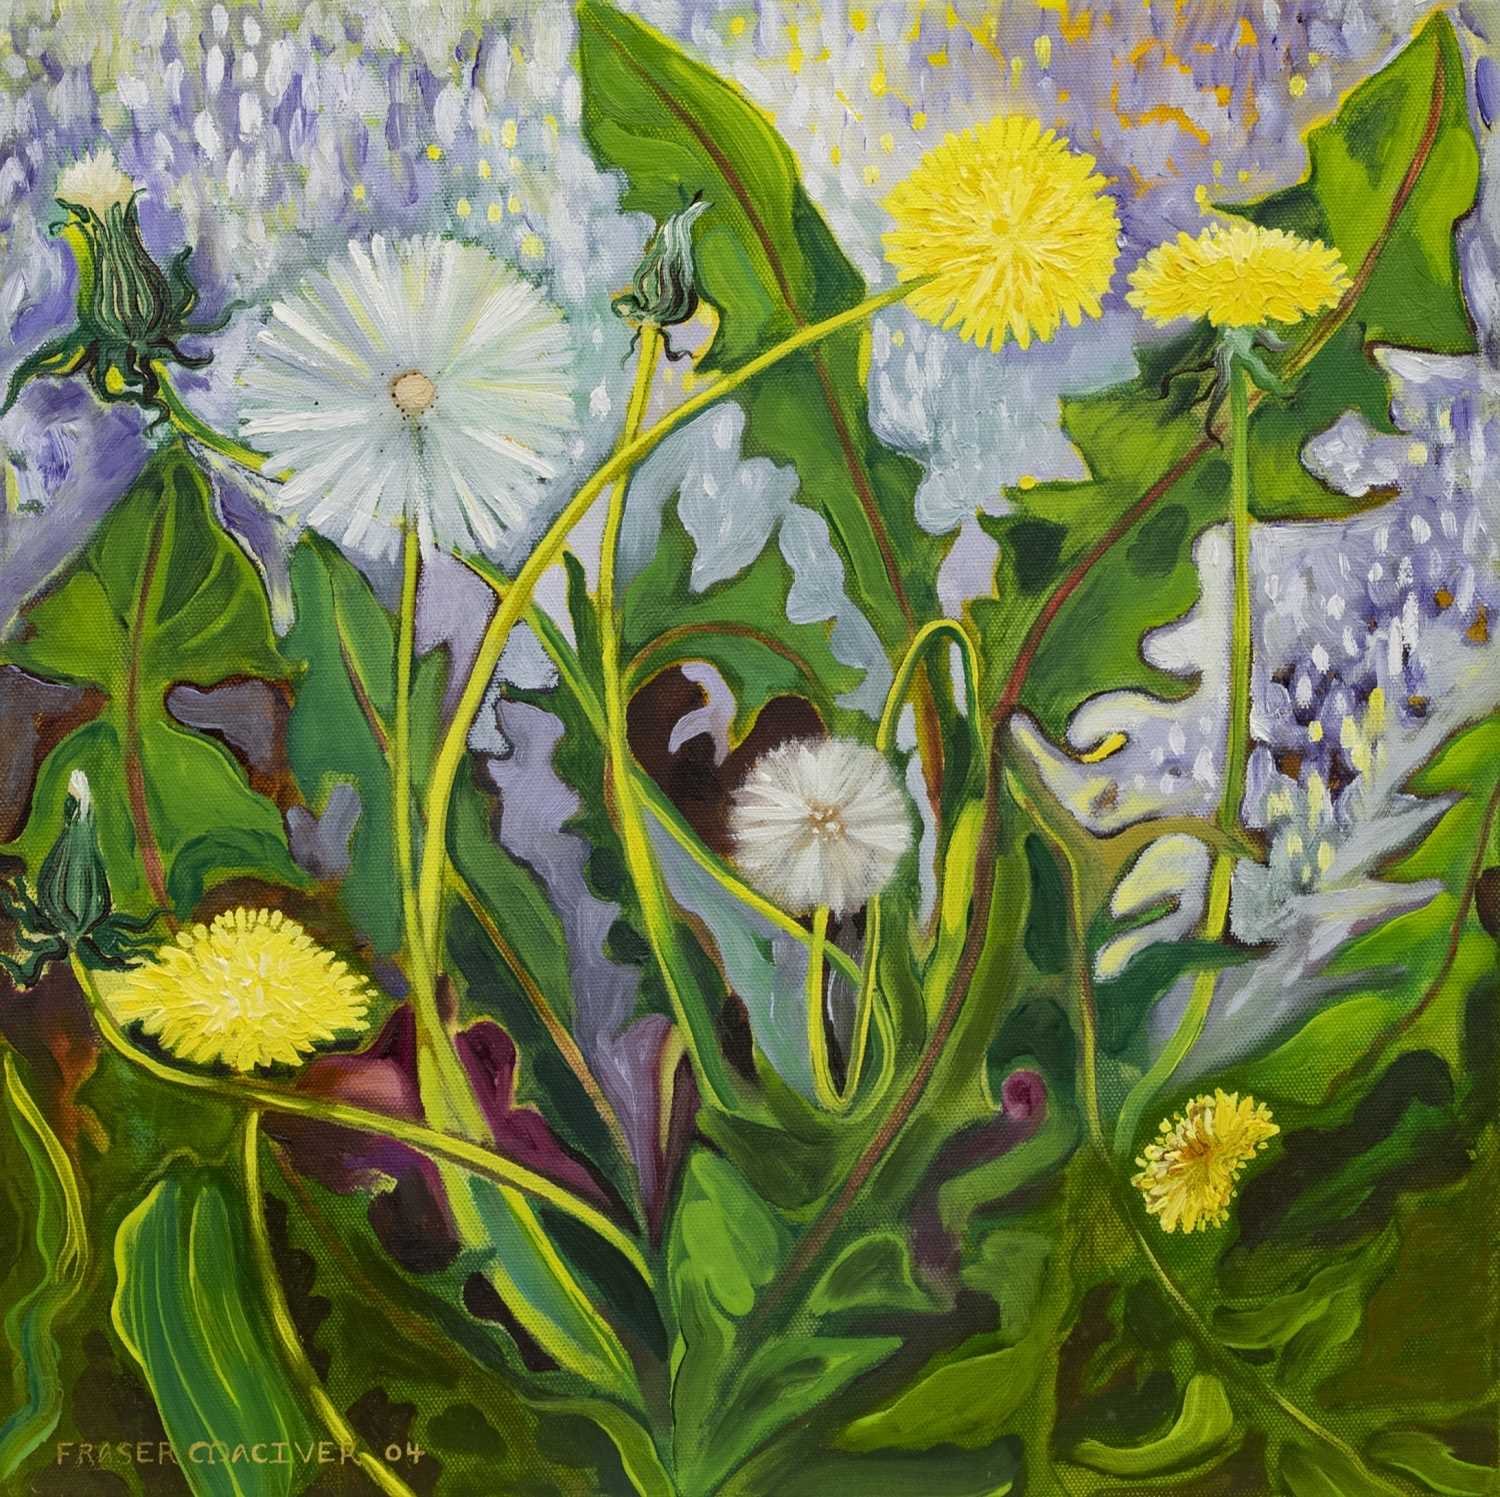 Lot 570 - DANDELIONS FROM 'THE WAGON', AN ACRYLIC BY FRASER MACIVER